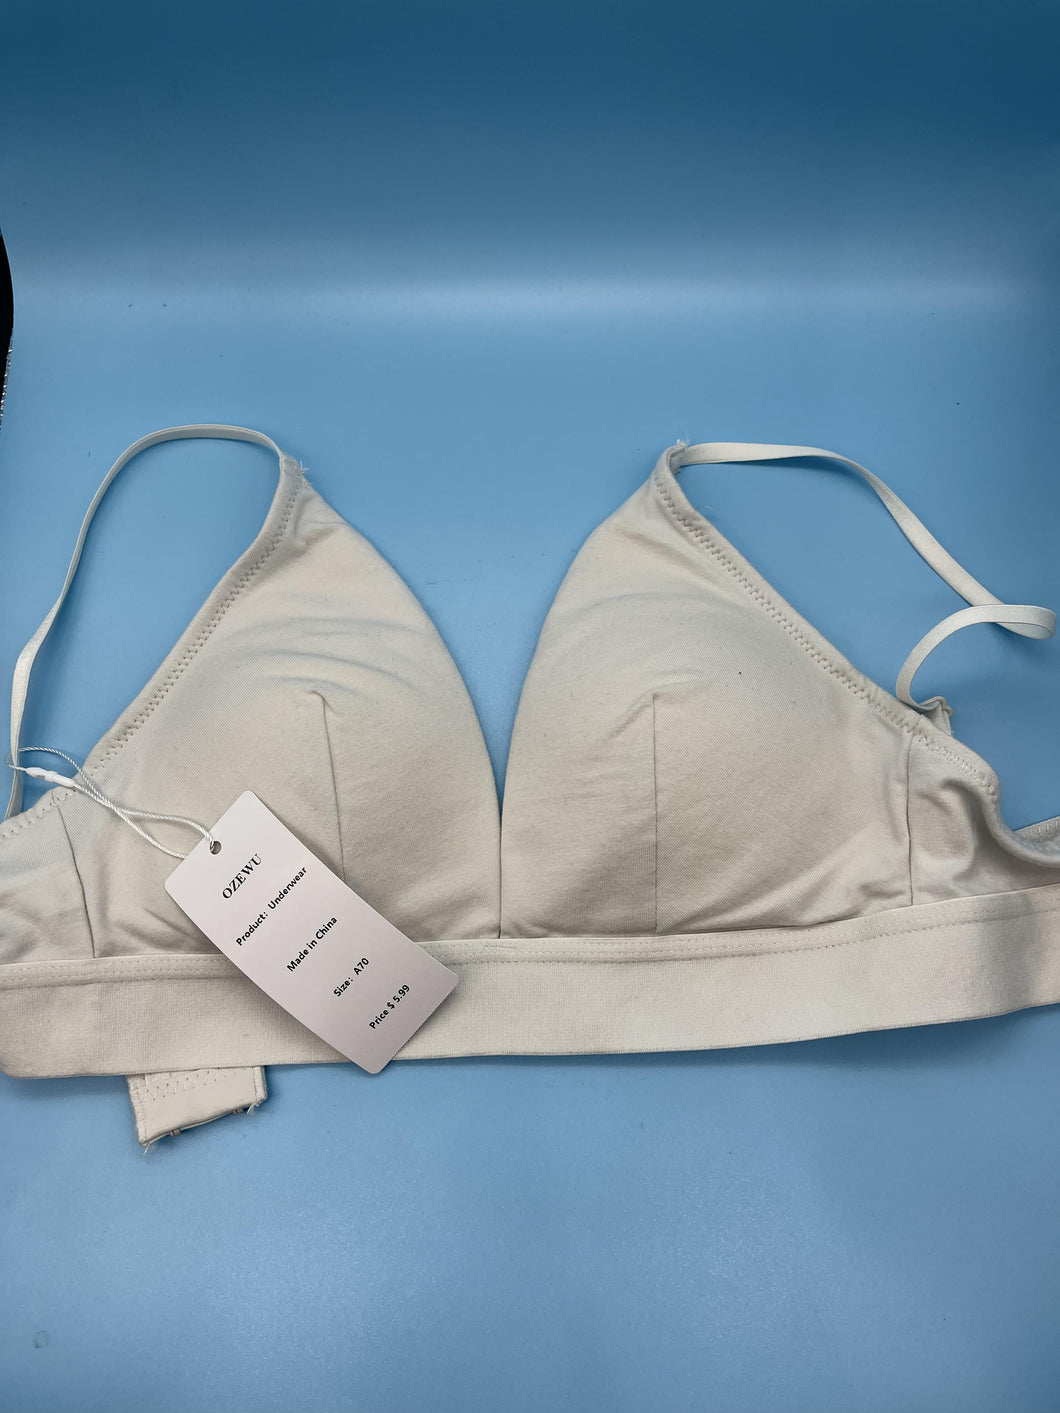 OZEWU Underwear Wirefree Cleavage Bra, Hook and Eye Closure, Sexy Lingerie for Women /Girls, Perfect for Gift